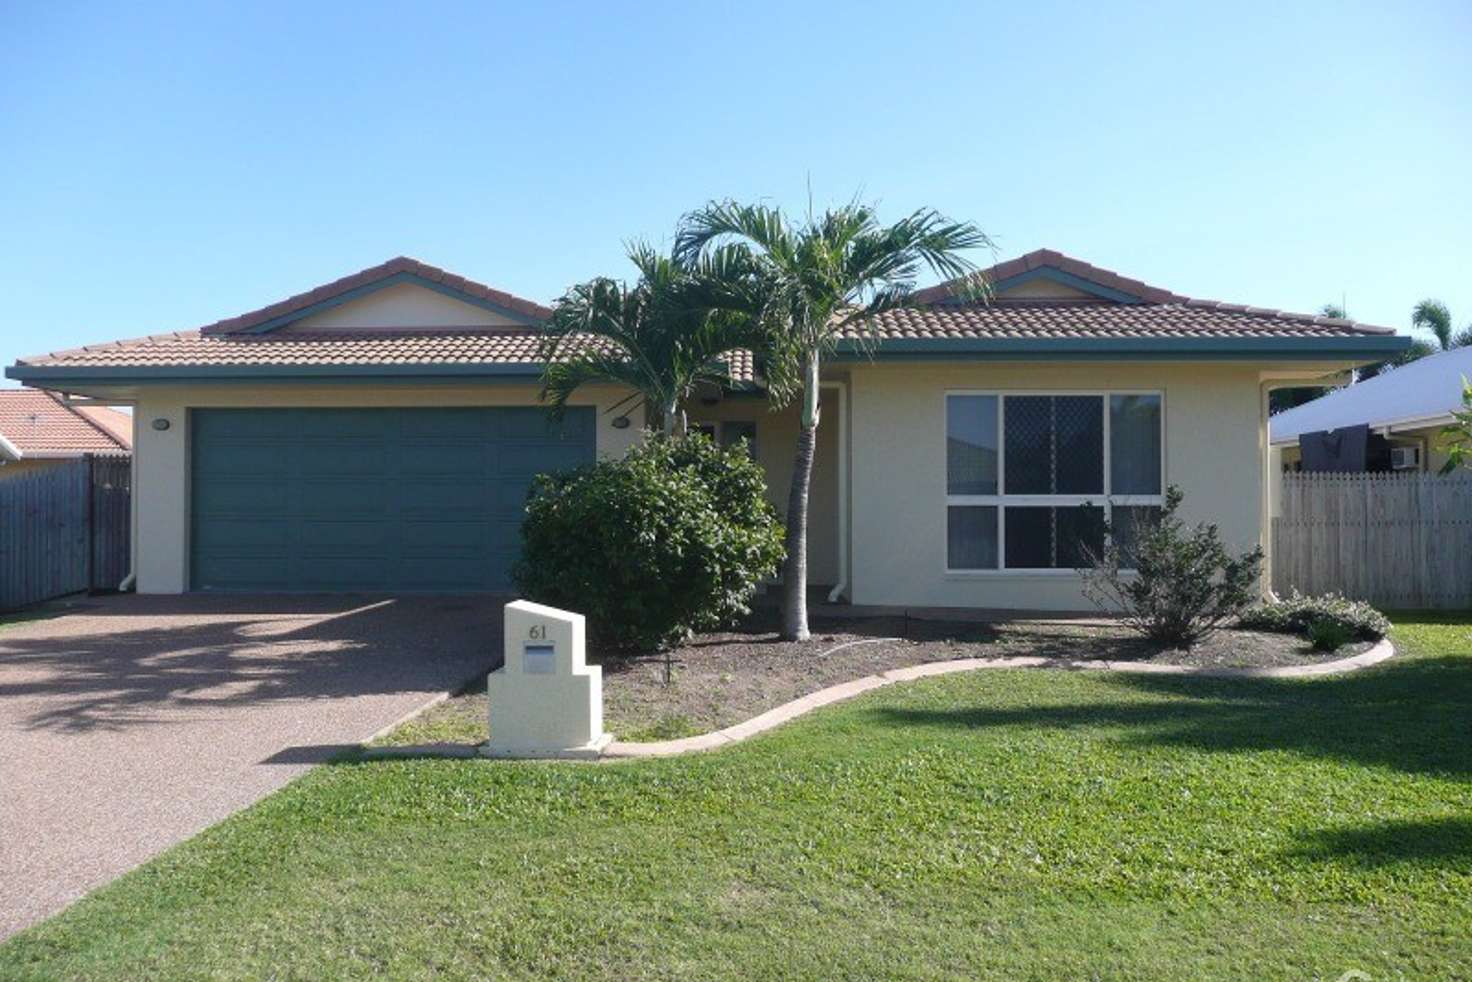 Main view of Homely house listing, 61 Marchwood Avenue, Kirwan QLD 4817